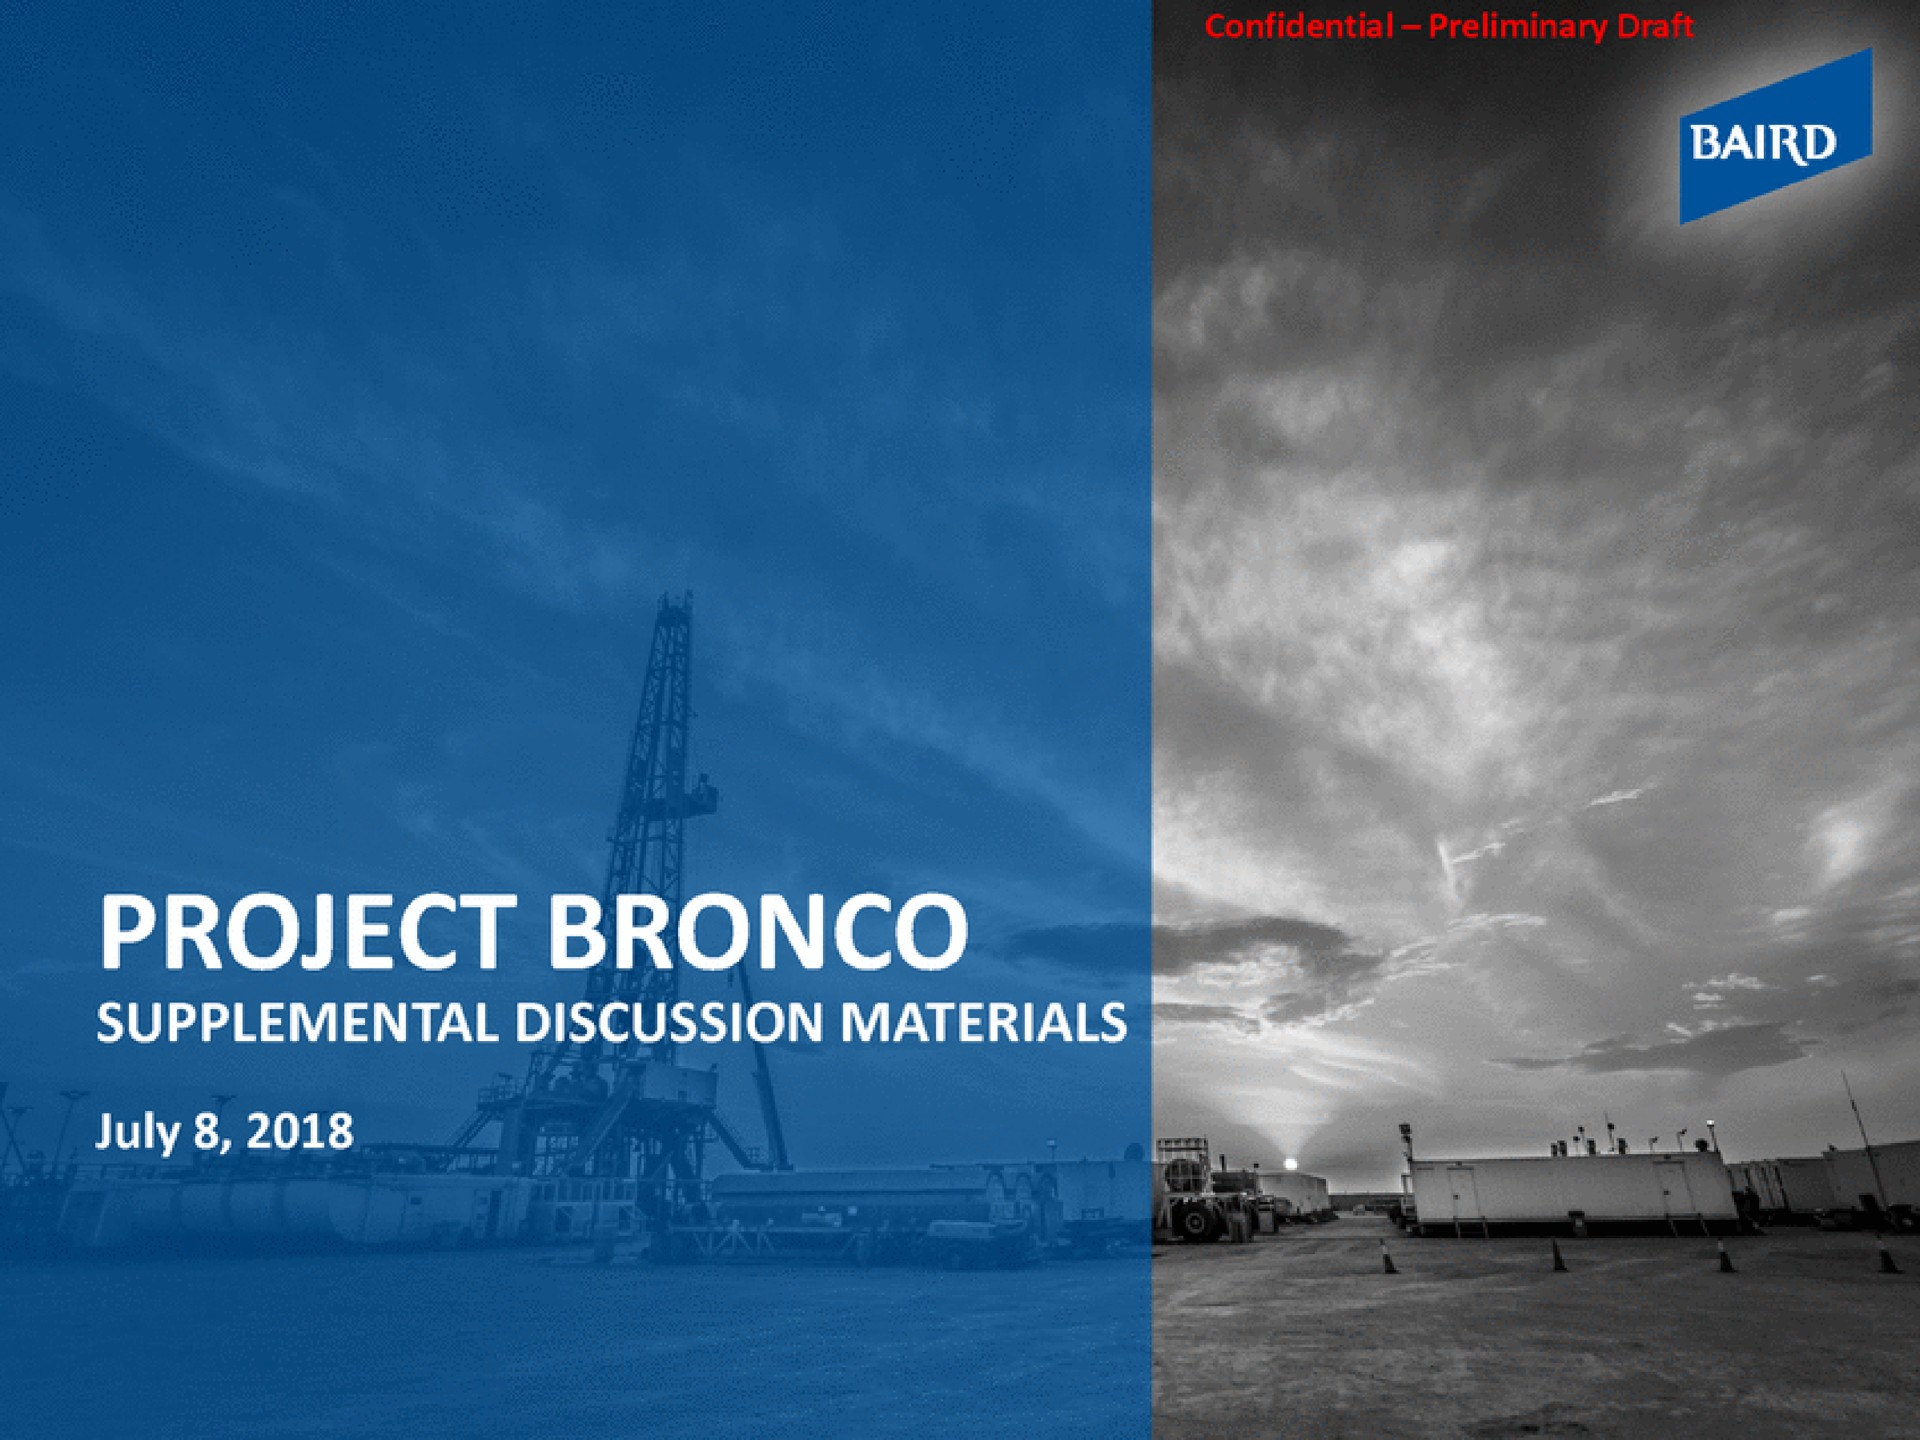 project bronco supplemental discussion materials rave ule | Baird